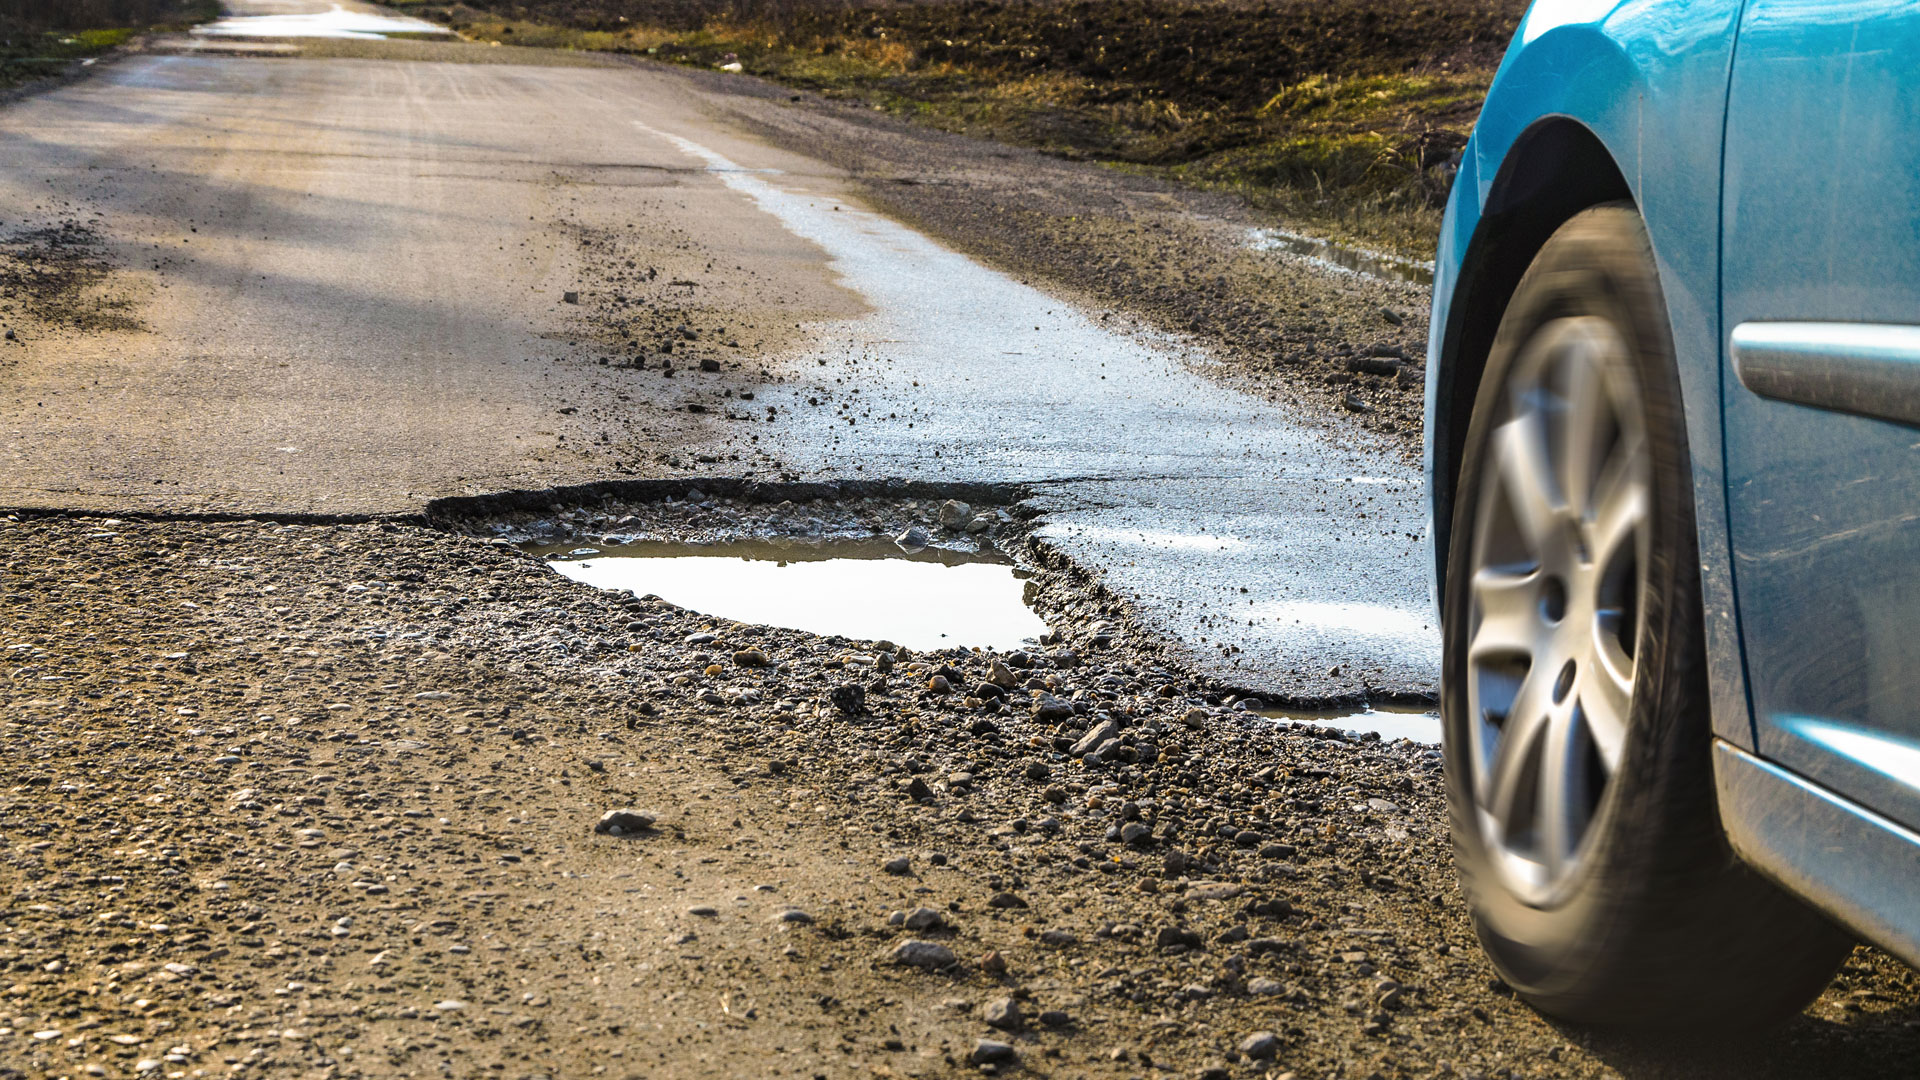 Two In Five Drivers Would Pay More Tax To Fix Potholes Motoring Research